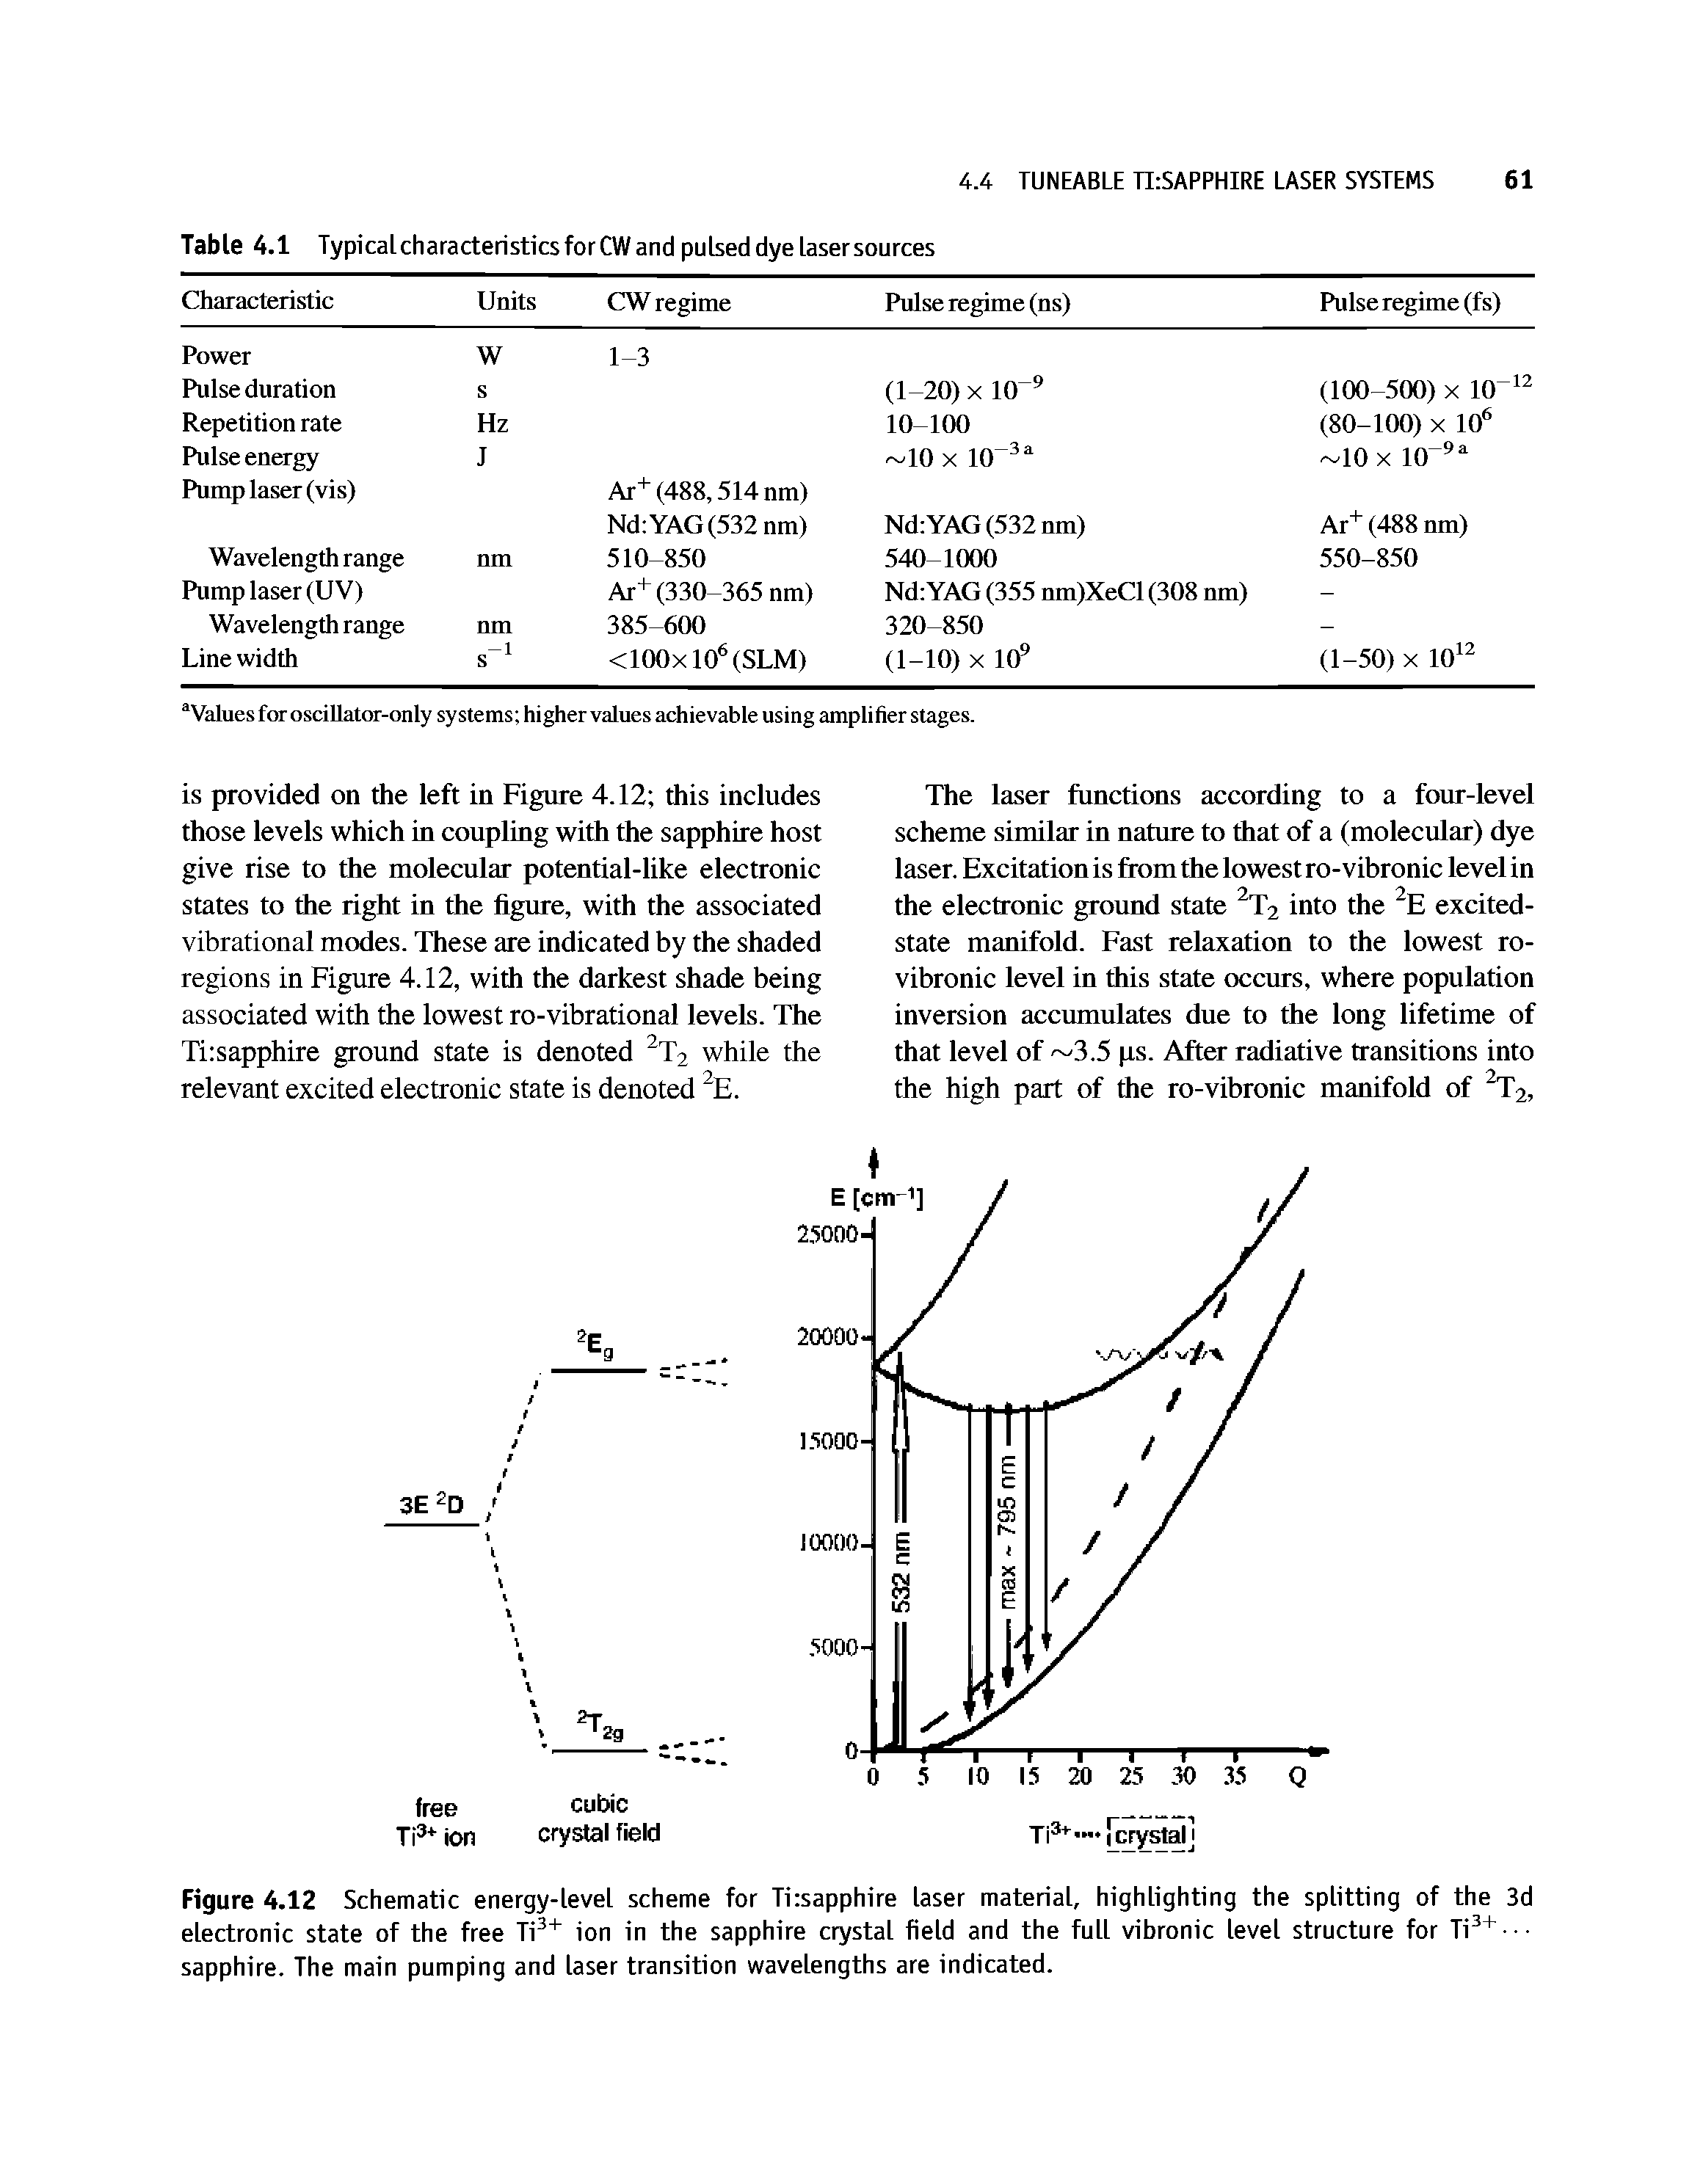 Figure 4.12 Schematic energy-level scheme for Ti sapphire laser material, highlighting the splitting of the 3d electronic state of the free Ti ion in the sapphire crystal field and the full vibronic level structure for Ti + - -sapphire. The main pumping and laser transition wavelengths are indicated.